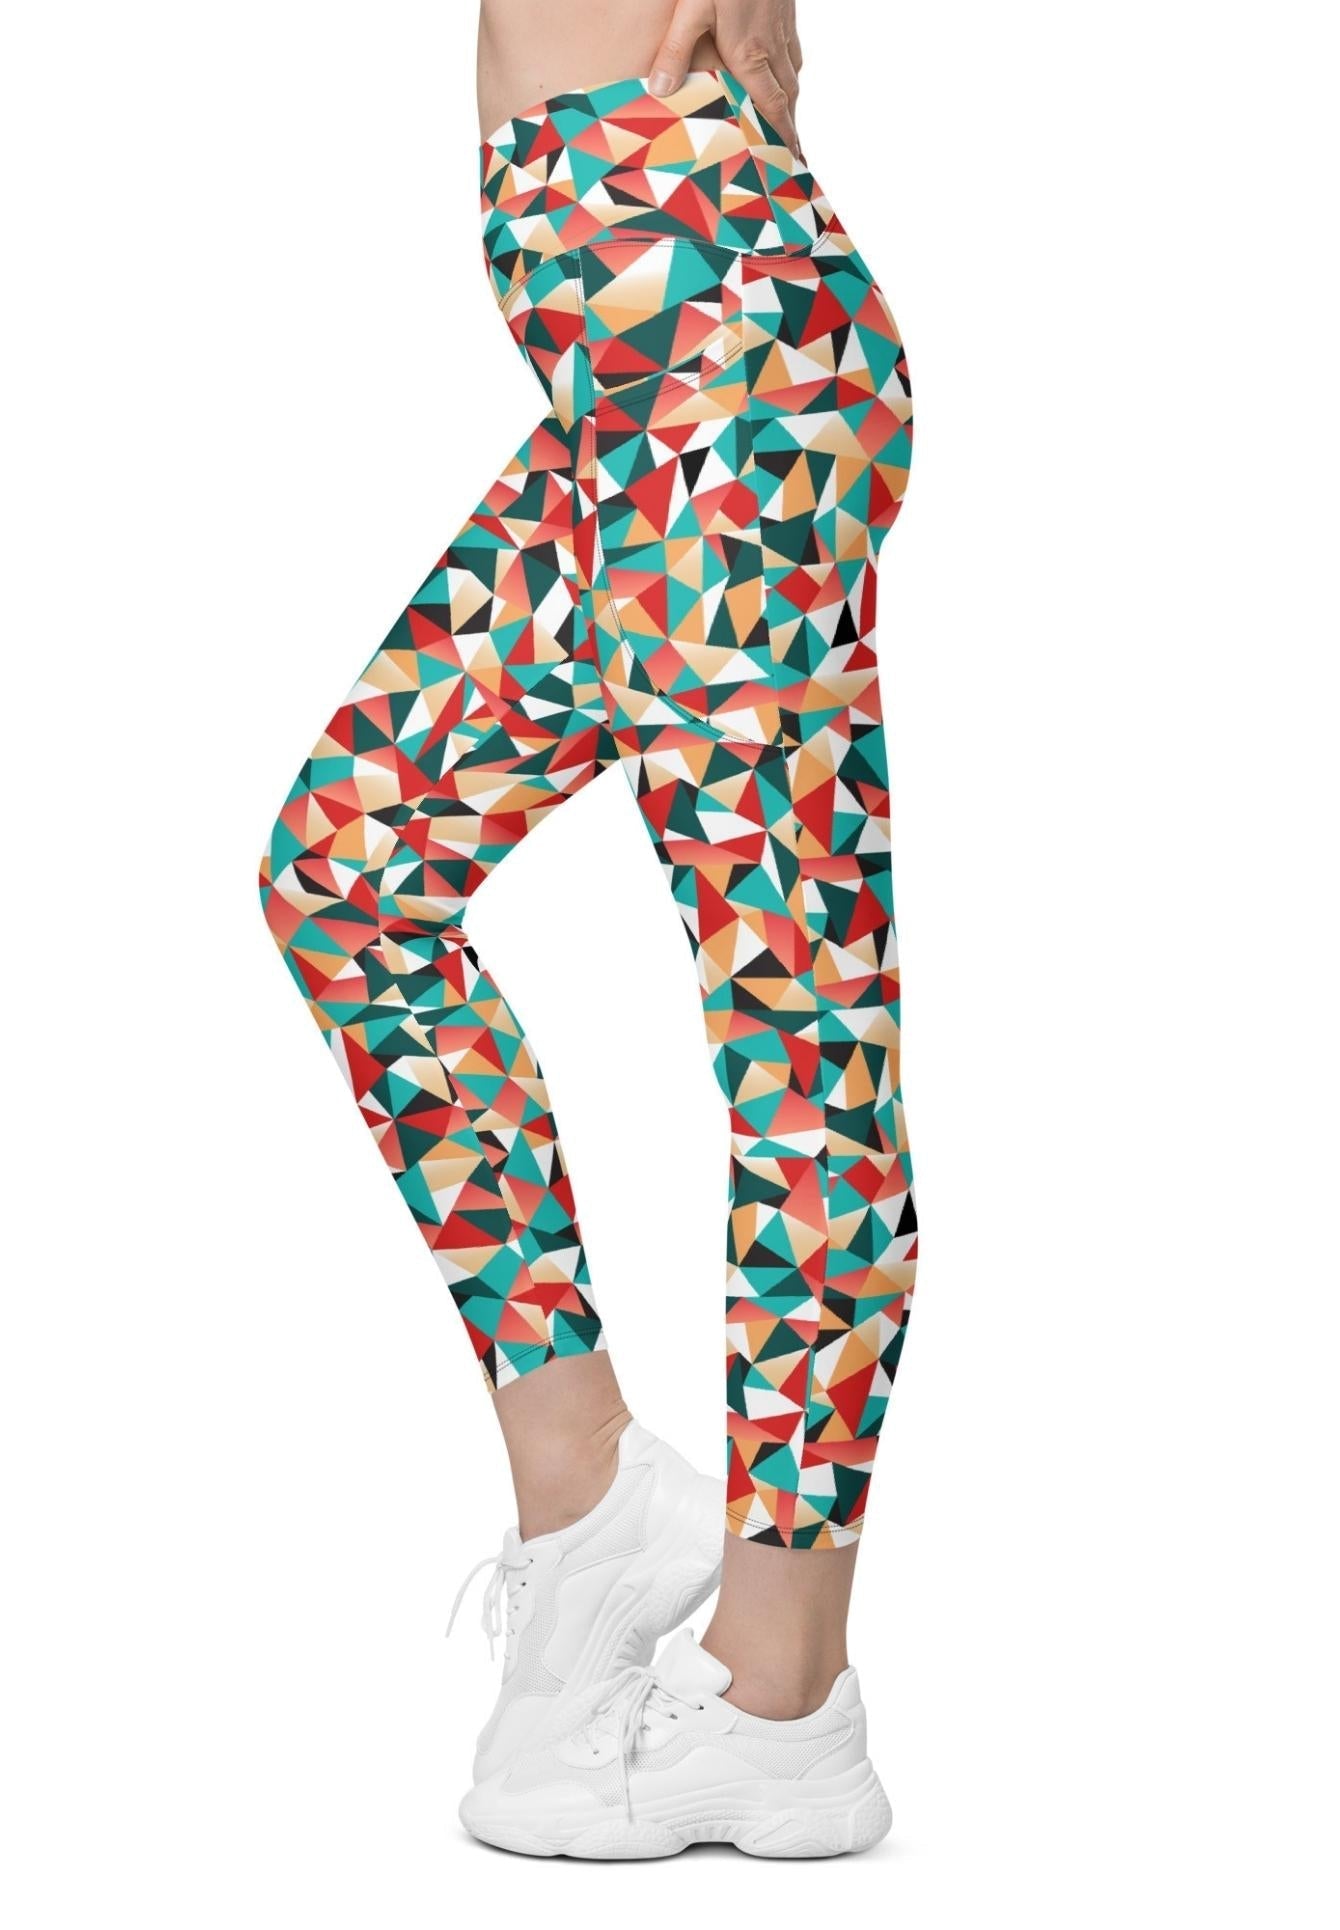 Kaleidoscopic Crossover Leggings With Pockets